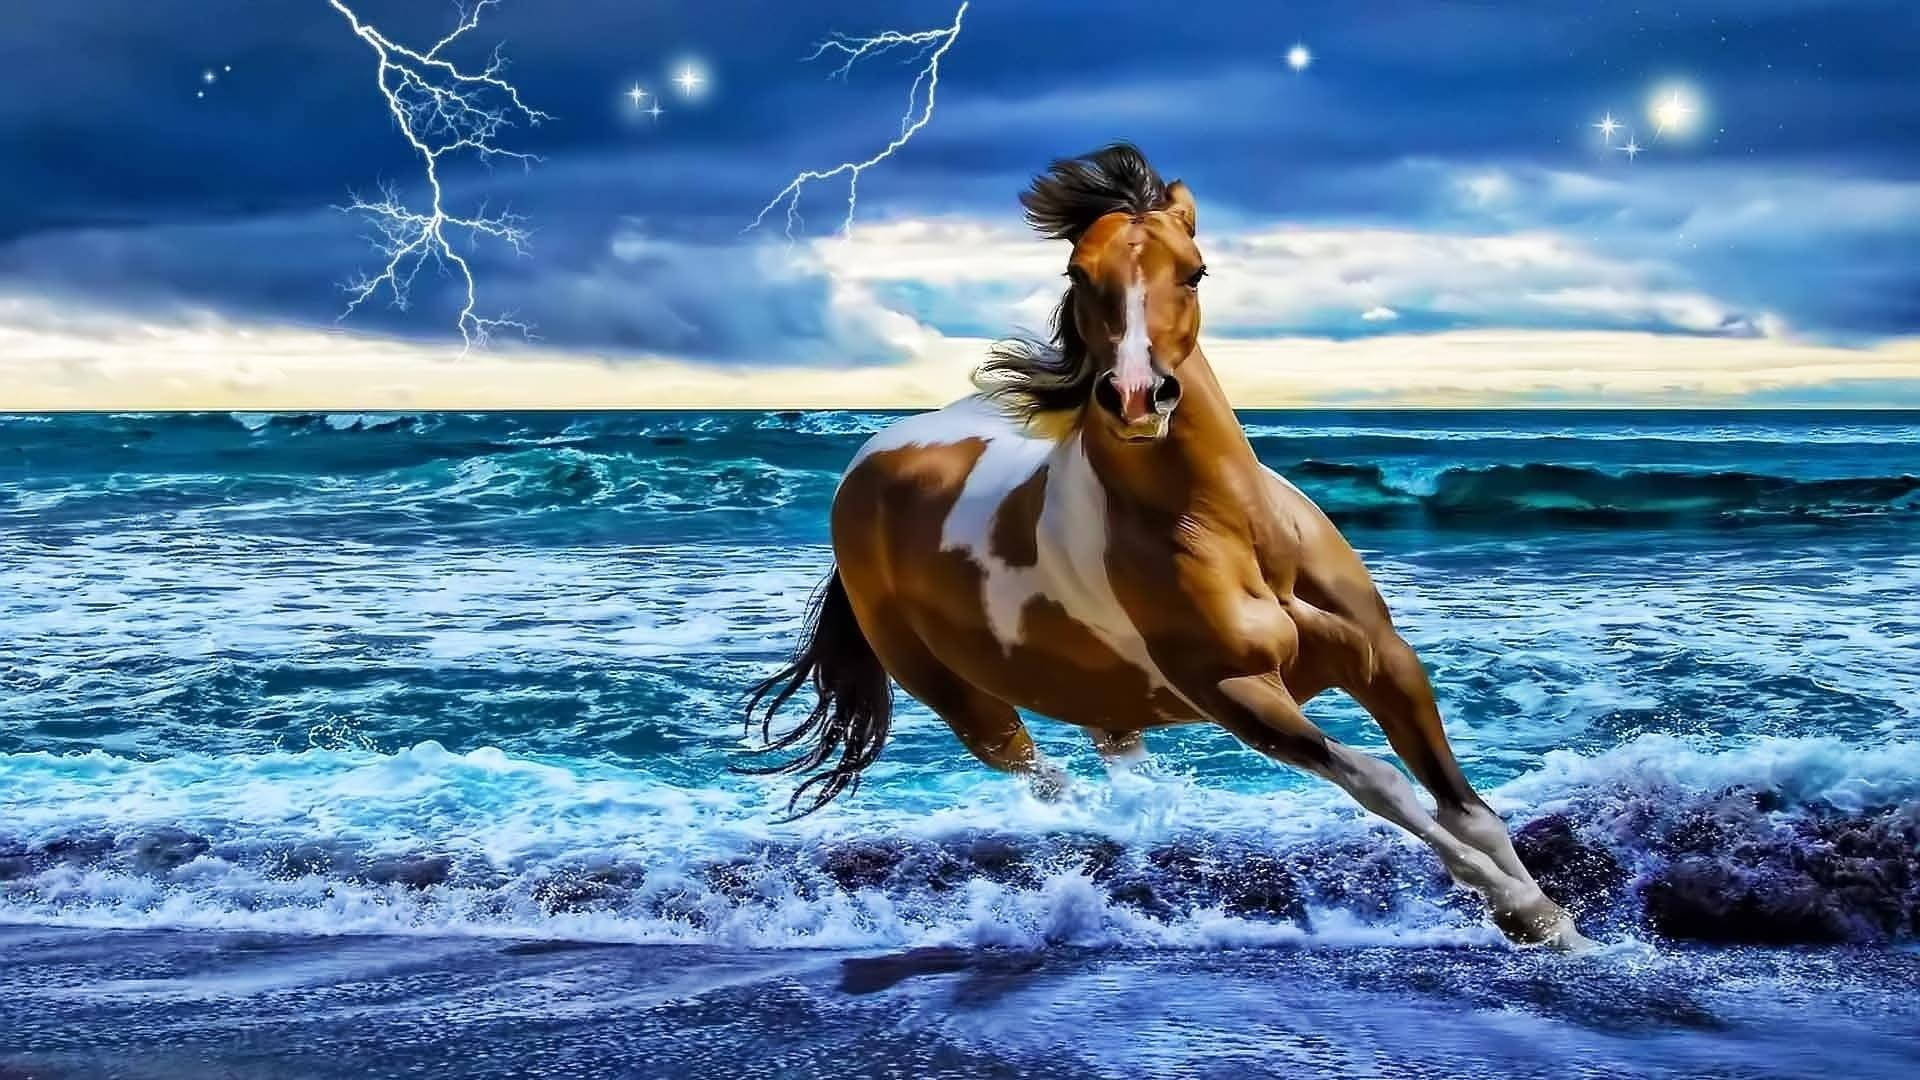 Brown Running Horse With White Markings Background